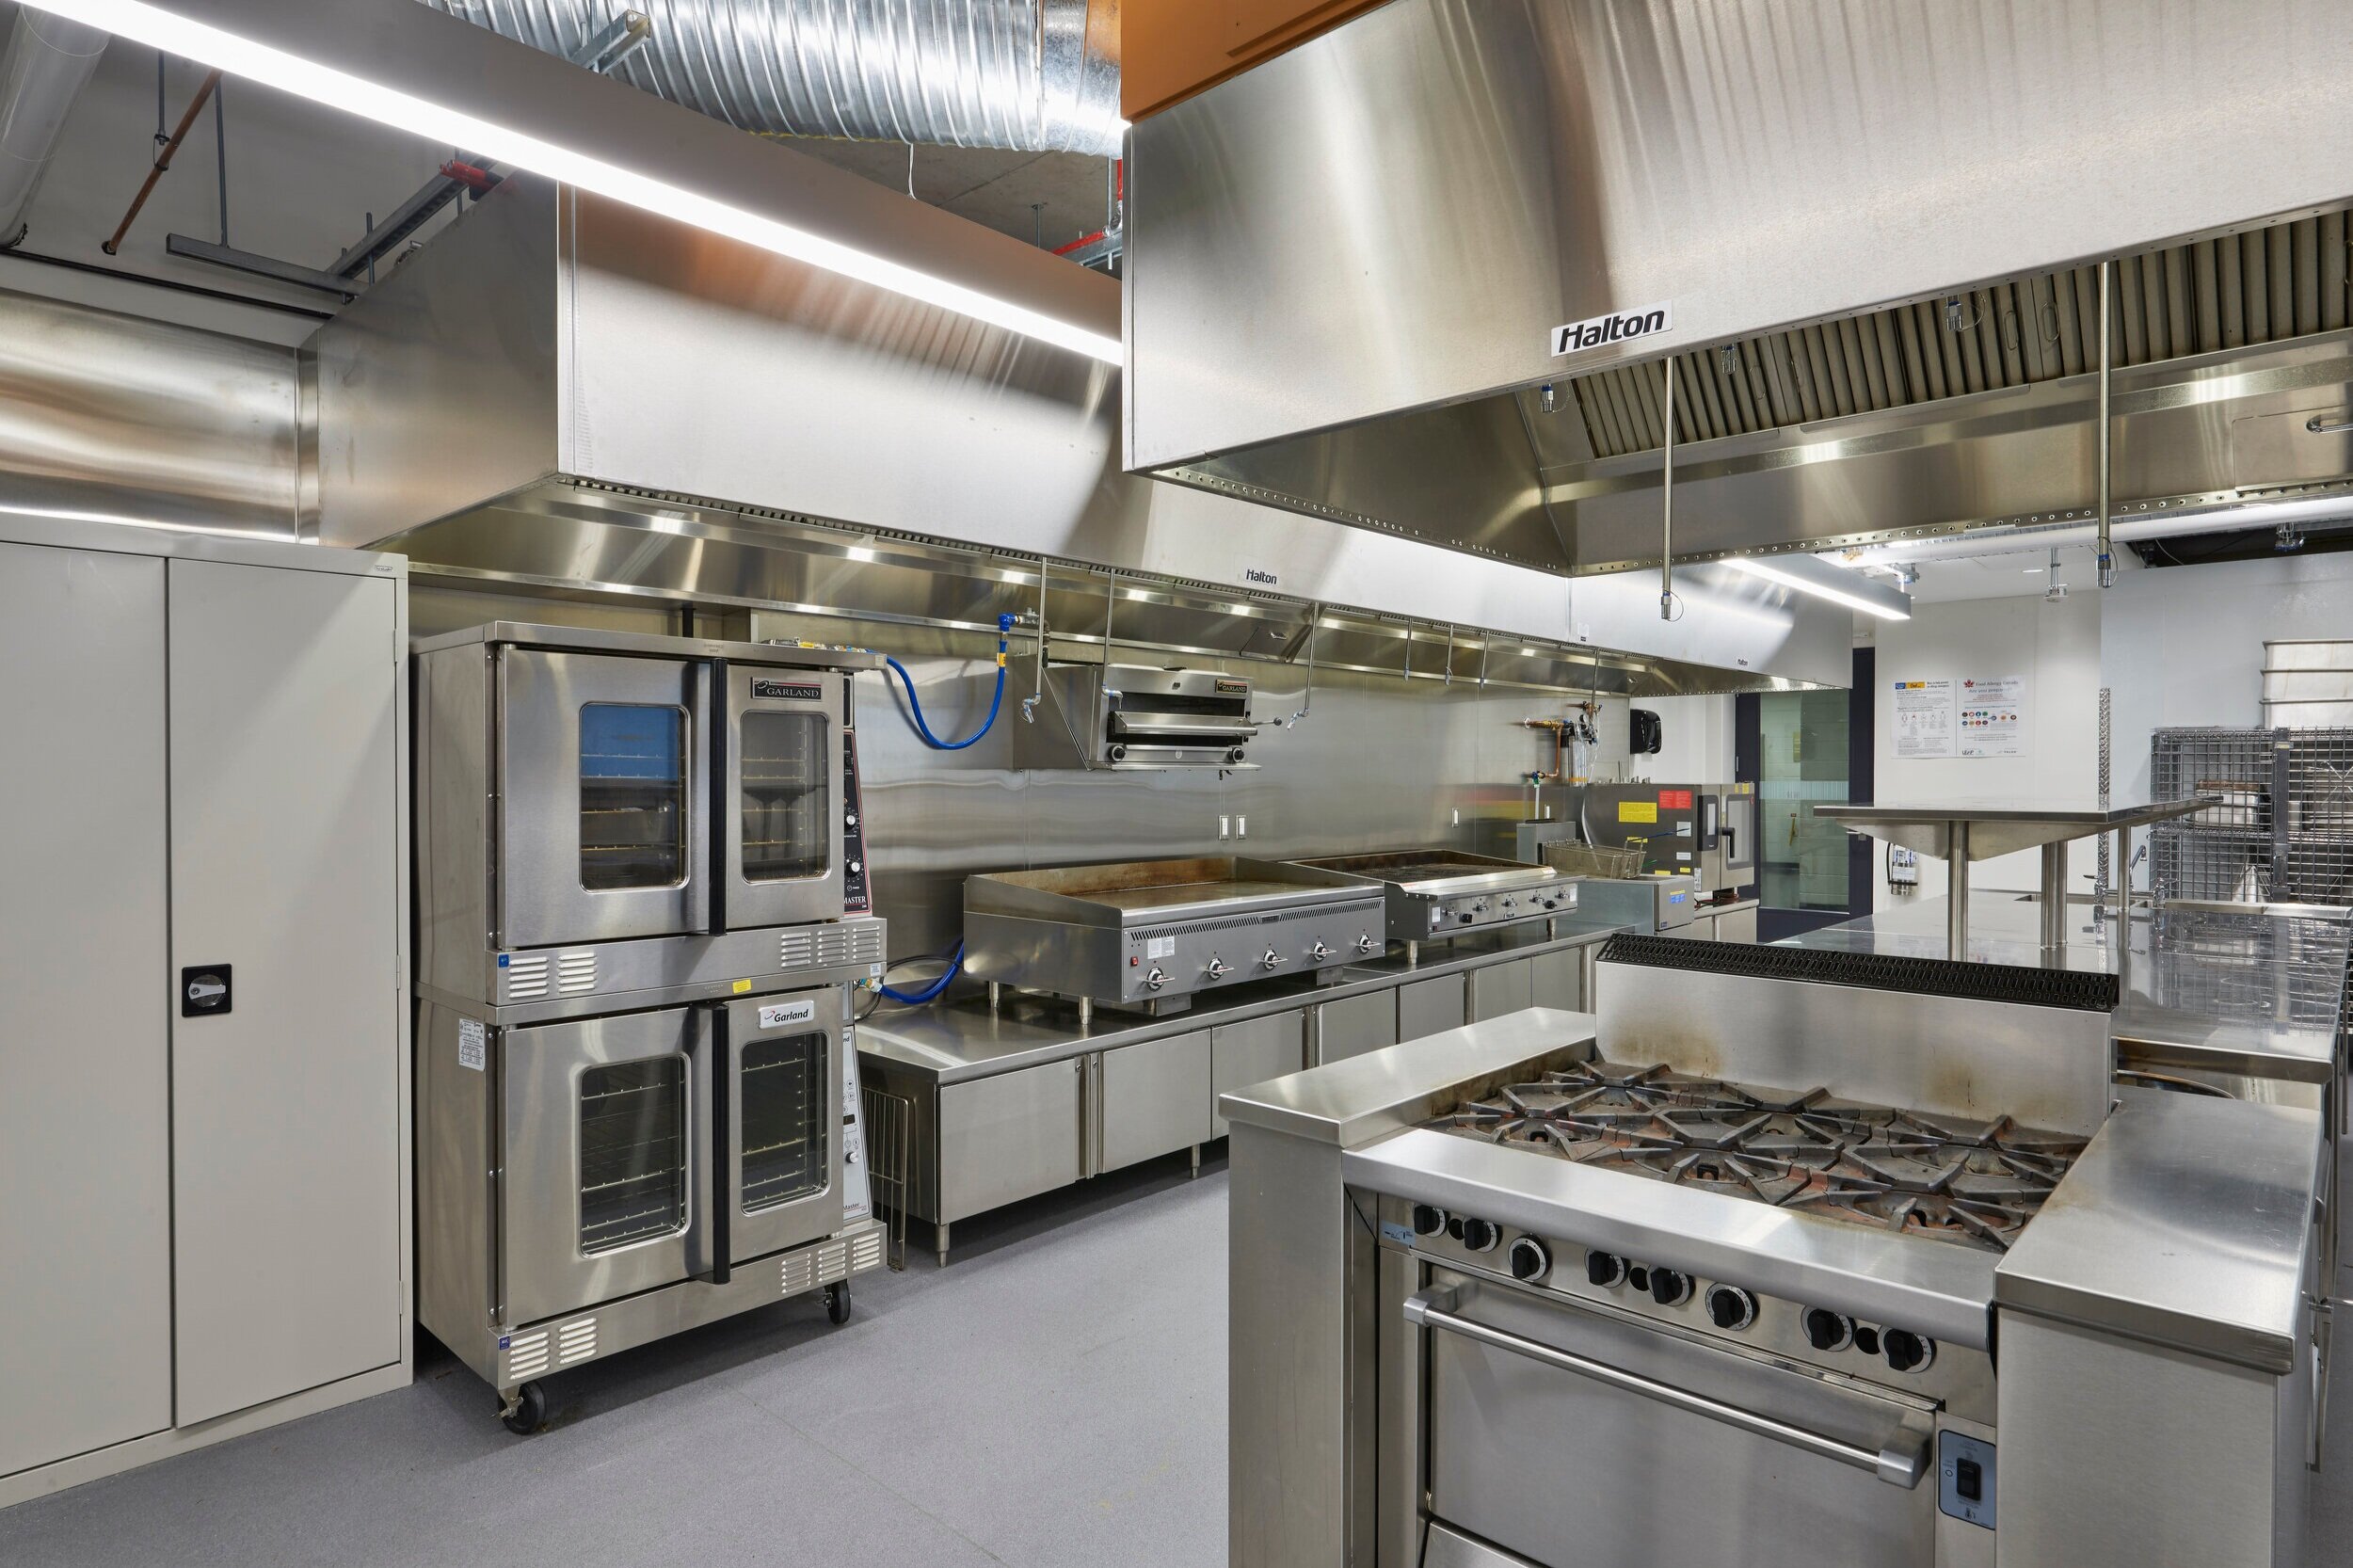 A Culinary Kitchen Lab at the Centre for Hospitality &amp; Culinary Arts at George Brown College